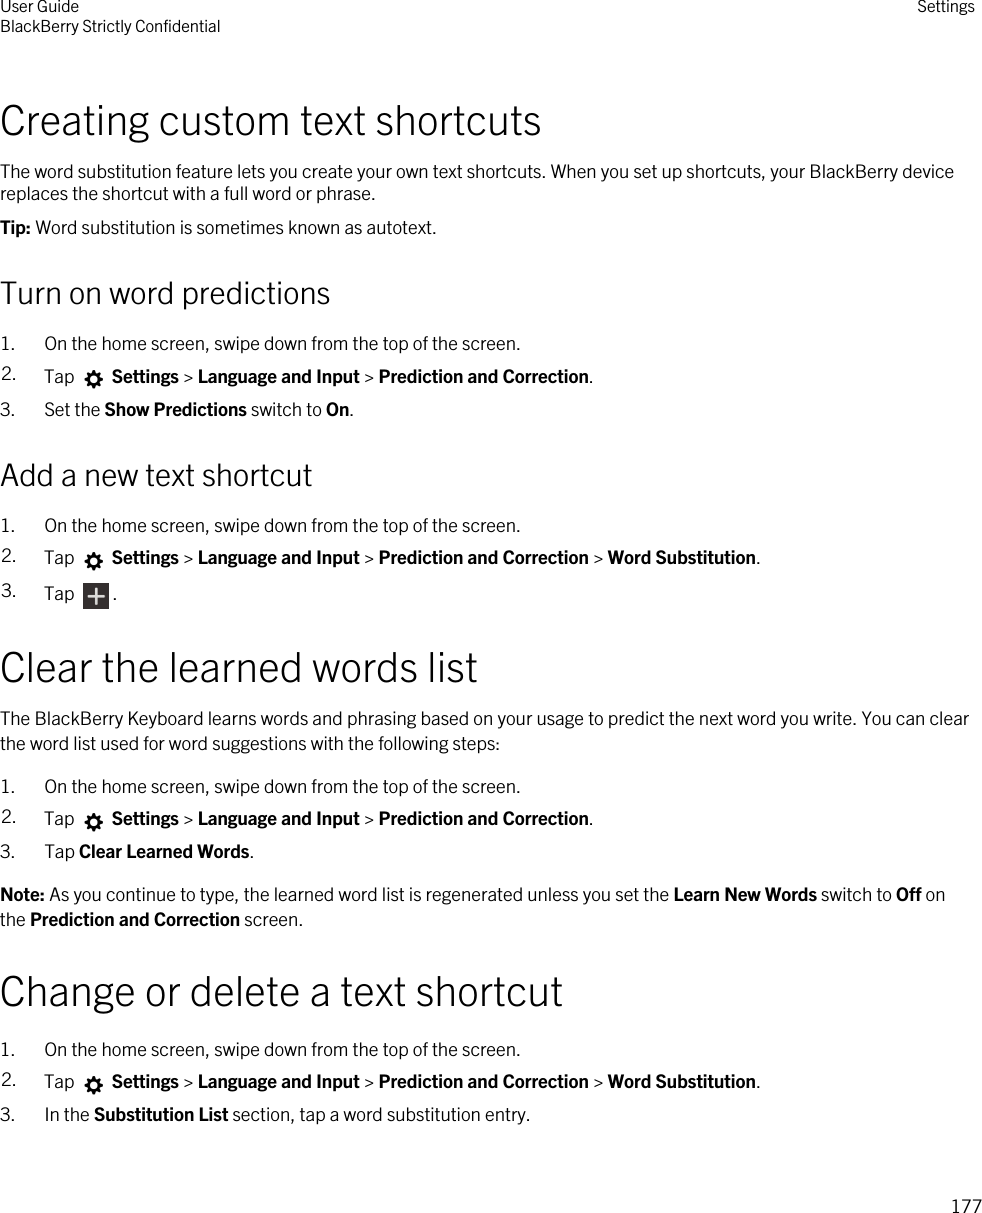 Creating custom text shortcutsThe word substitution feature lets you create your own text shortcuts. When you set up shortcuts, your BlackBerry device replaces the shortcut with a full word or phrase.Tip: Word substitution is sometimes known as autotext.Turn on word predictions1. On the home screen, swipe down from the top of the screen.2. Tap   Settings &gt; Language and Input &gt; Prediction and Correction. 3. Set the Show Predictions switch to On.Add a new text shortcut1. On the home screen, swipe down from the top of the screen.2. Tap   Settings &gt; Language and Input &gt; Prediction and Correction &gt; Word Substitution. 3. Tap  .Clear the learned words listThe BlackBerry Keyboard learns words and phrasing based on your usage to predict the next word you write. You can clear the word list used for word suggestions with the following steps:1. On the home screen, swipe down from the top of the screen.2. Tap   Settings &gt; Language and Input &gt; Prediction and Correction. 3. Tap Clear Learned Words.Note: As you continue to type, the learned word list is regenerated unless you set the Learn New Words switch to Off on the Prediction and Correction screen.Change or delete a text shortcut1. On the home screen, swipe down from the top of the screen.2. Tap   Settings &gt; Language and Input &gt; Prediction and Correction &gt; Word Substitution. 3. In the Substitution List section, tap a word substitution entry.User GuideBlackBerry Strictly Confidential Settings177